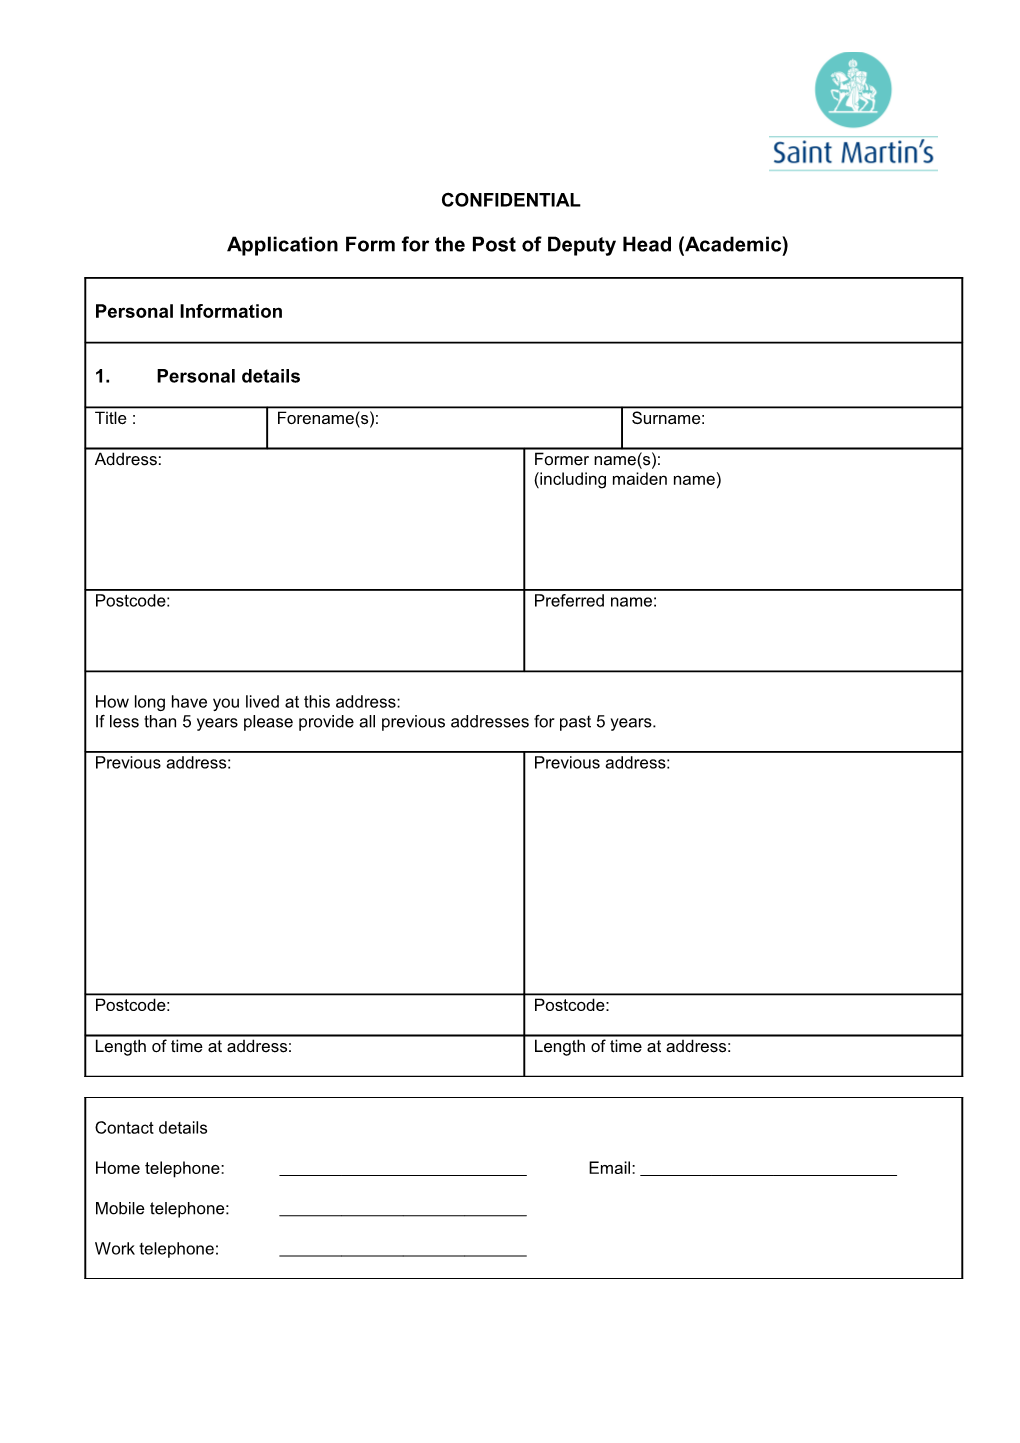 Application Form for the Post of Deputy Head (Academic)